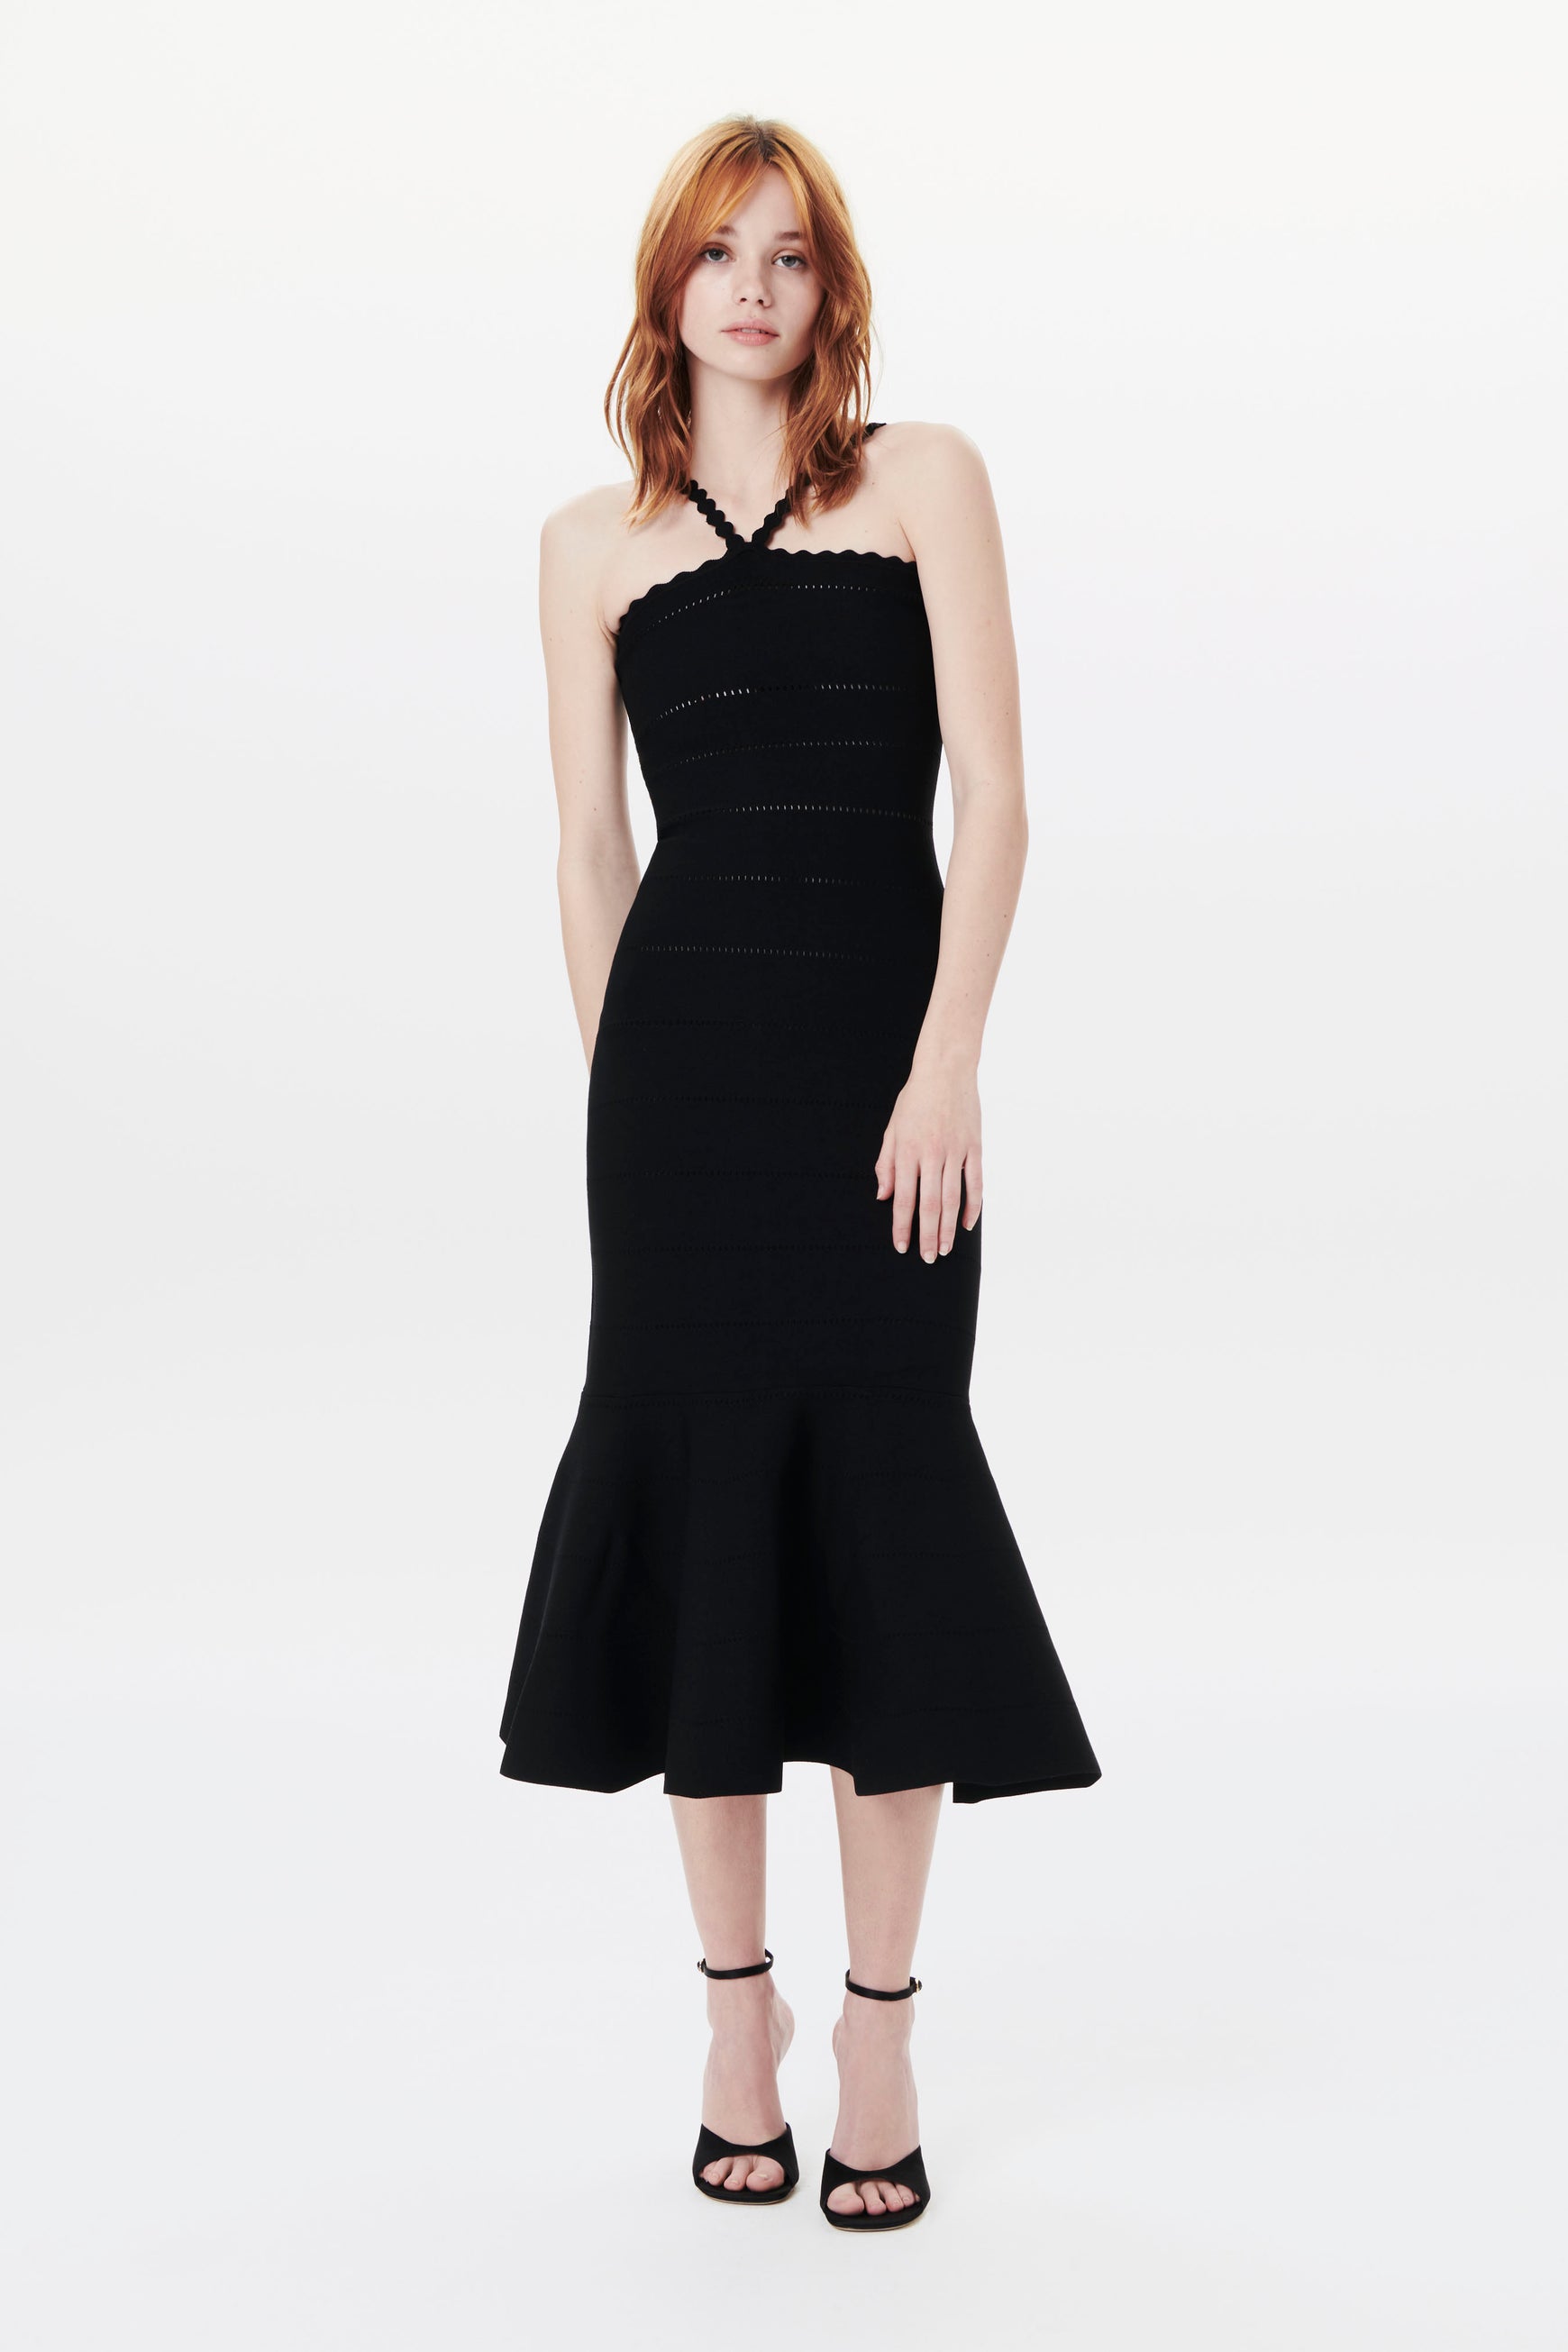 The Scalloped Strap Flare Dress in Black from Victoria Beckham is made from compact viscose fabrics with thin straps, brings a feminine feel for its body-con style with flounced hem.